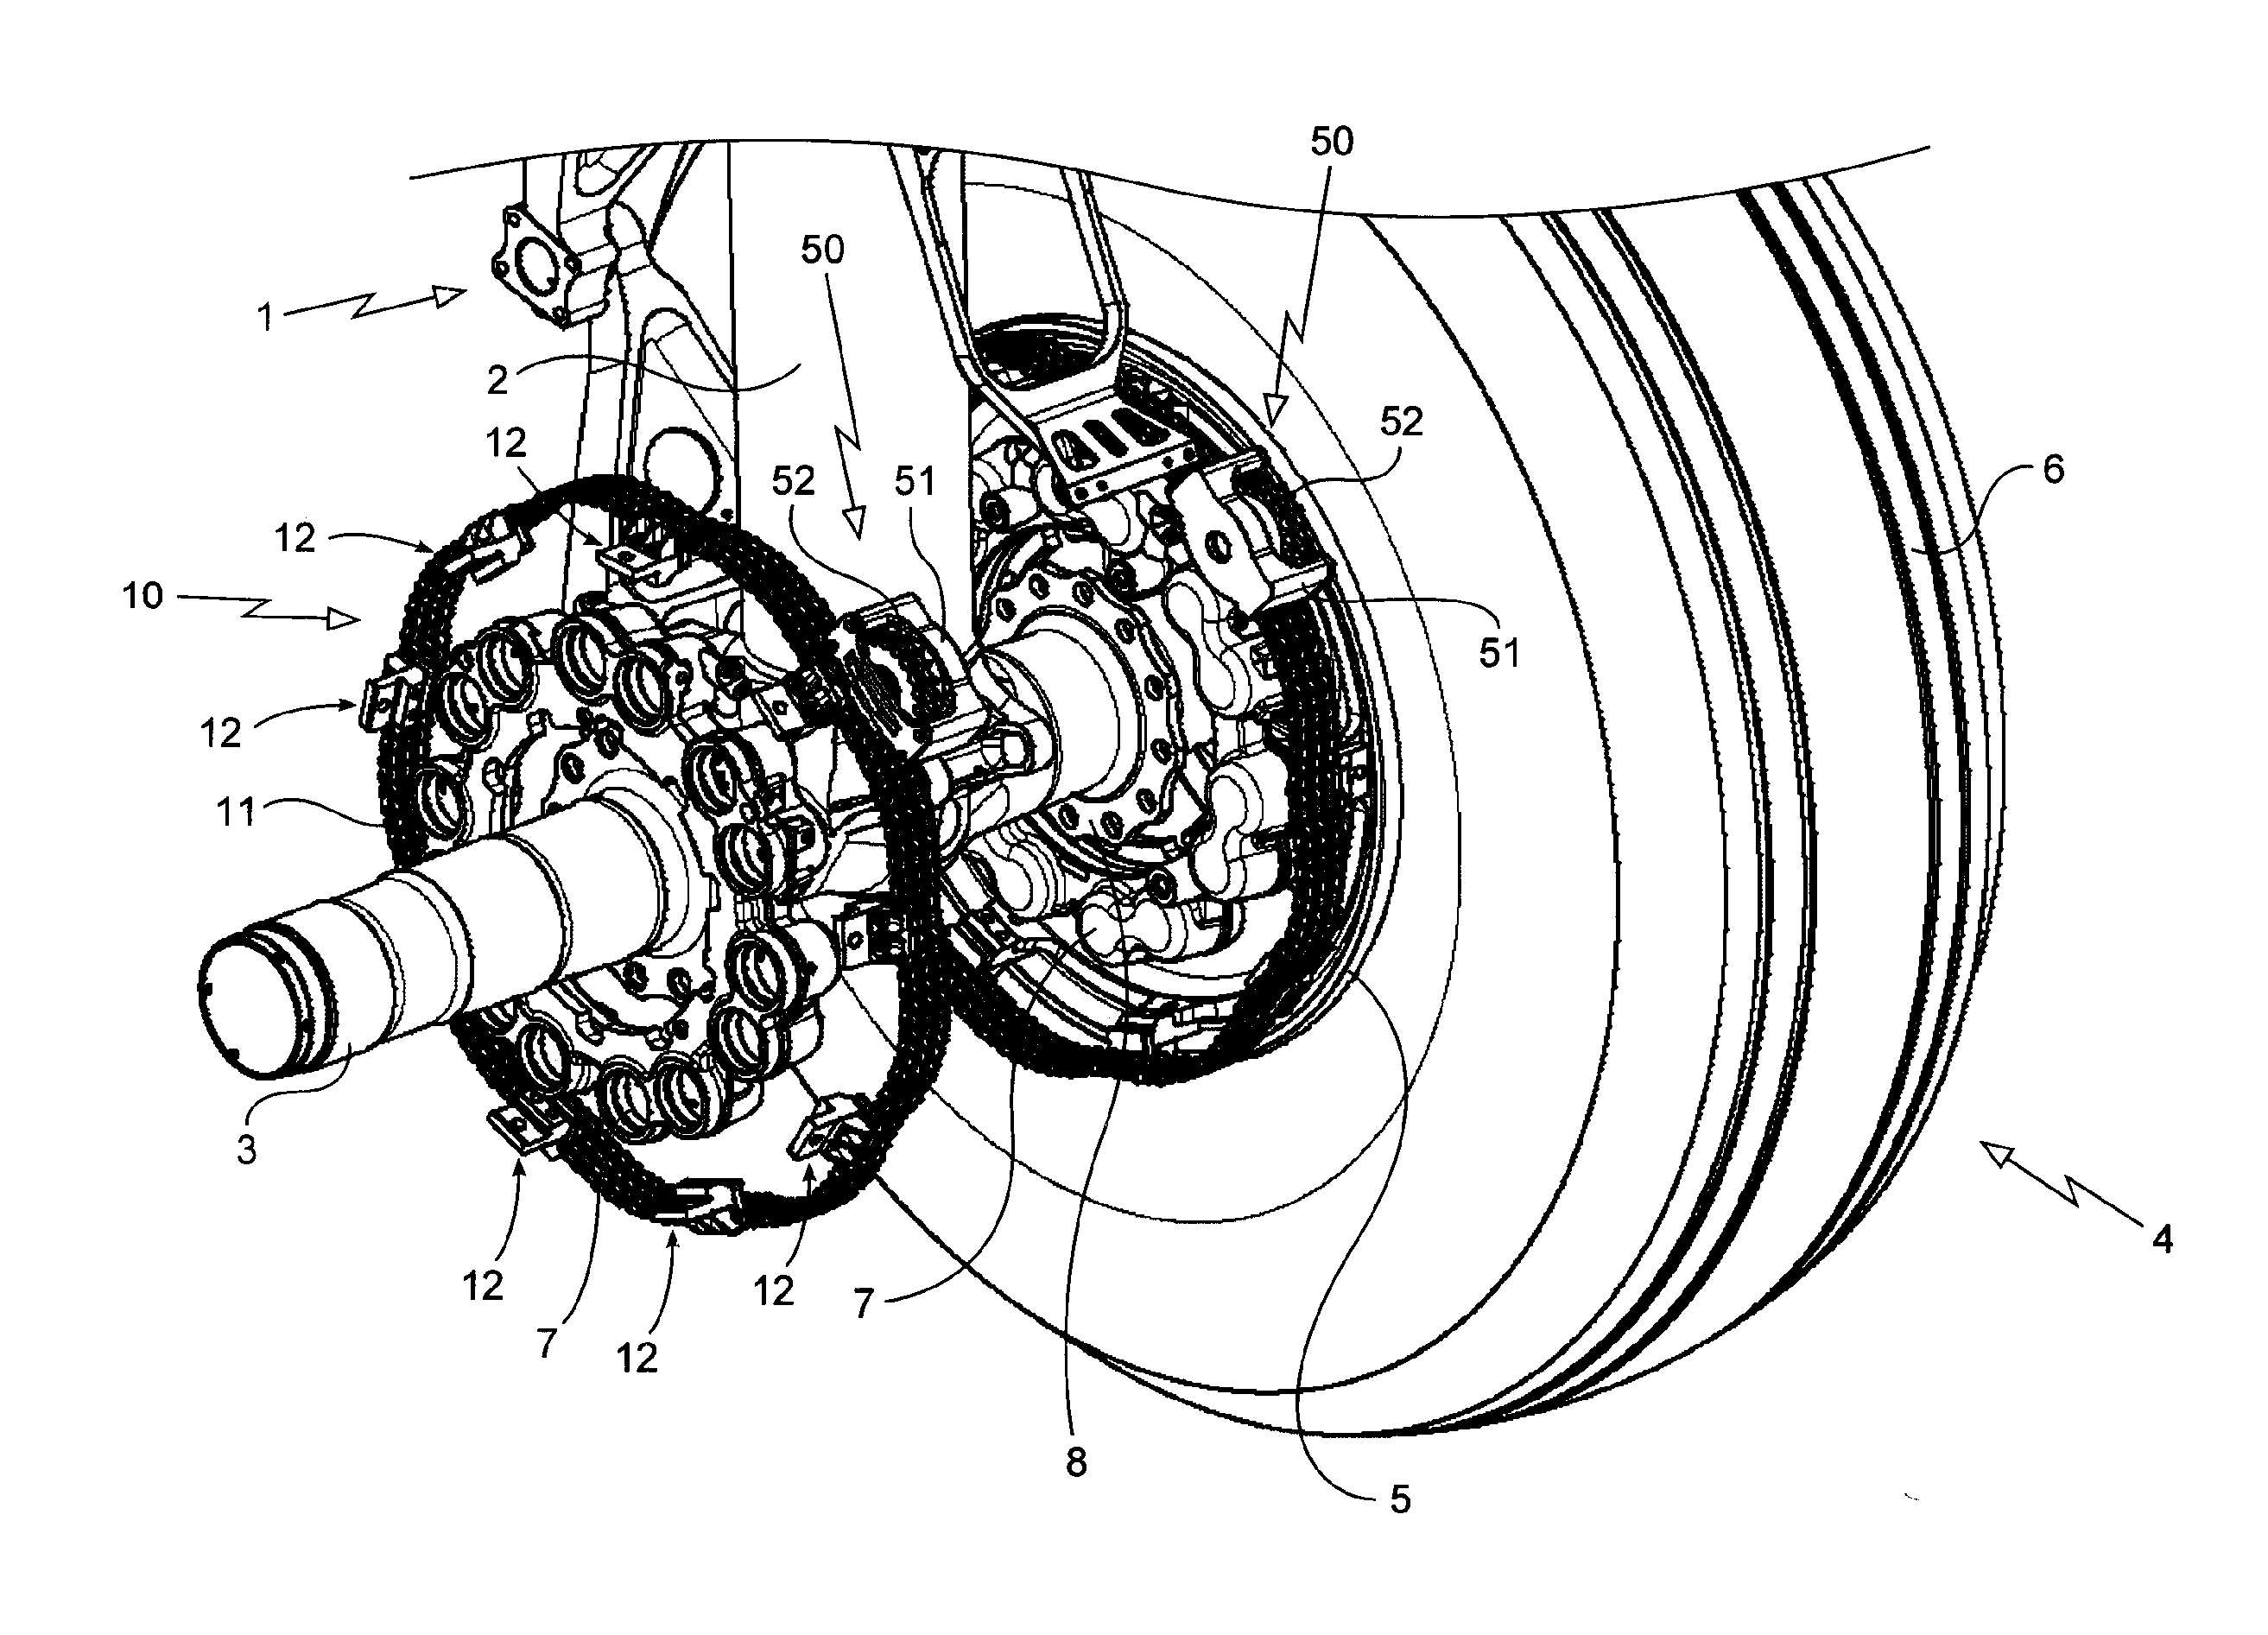 Aircraft wheel with rotational drive attached to clevises projecting from wheel rim